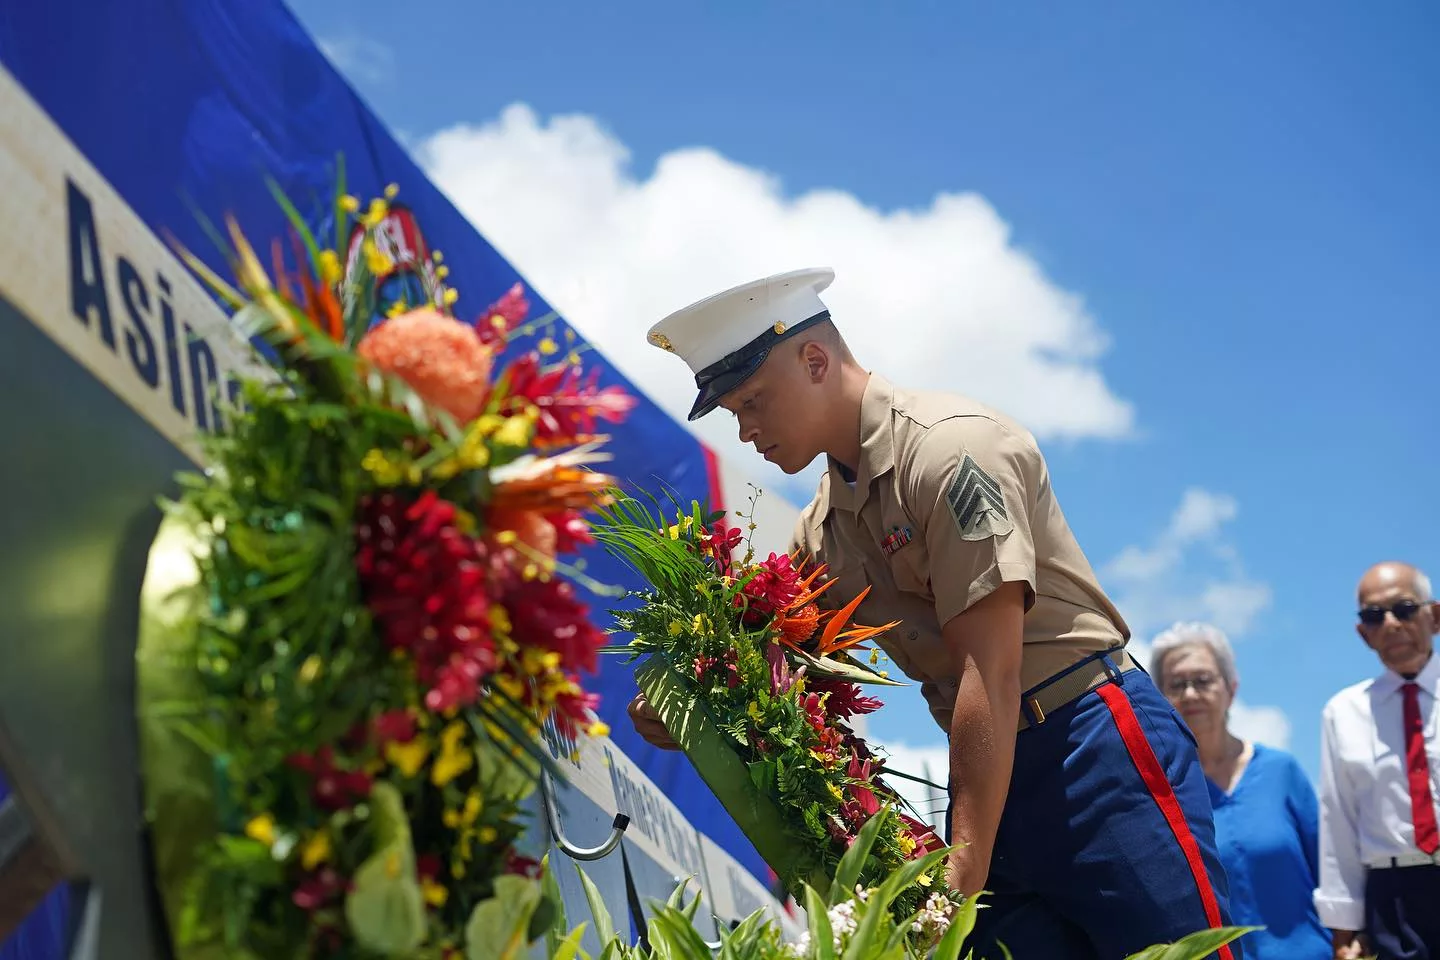 Guam celebrates 79th anniversary of liberation amidst typhoon recovery